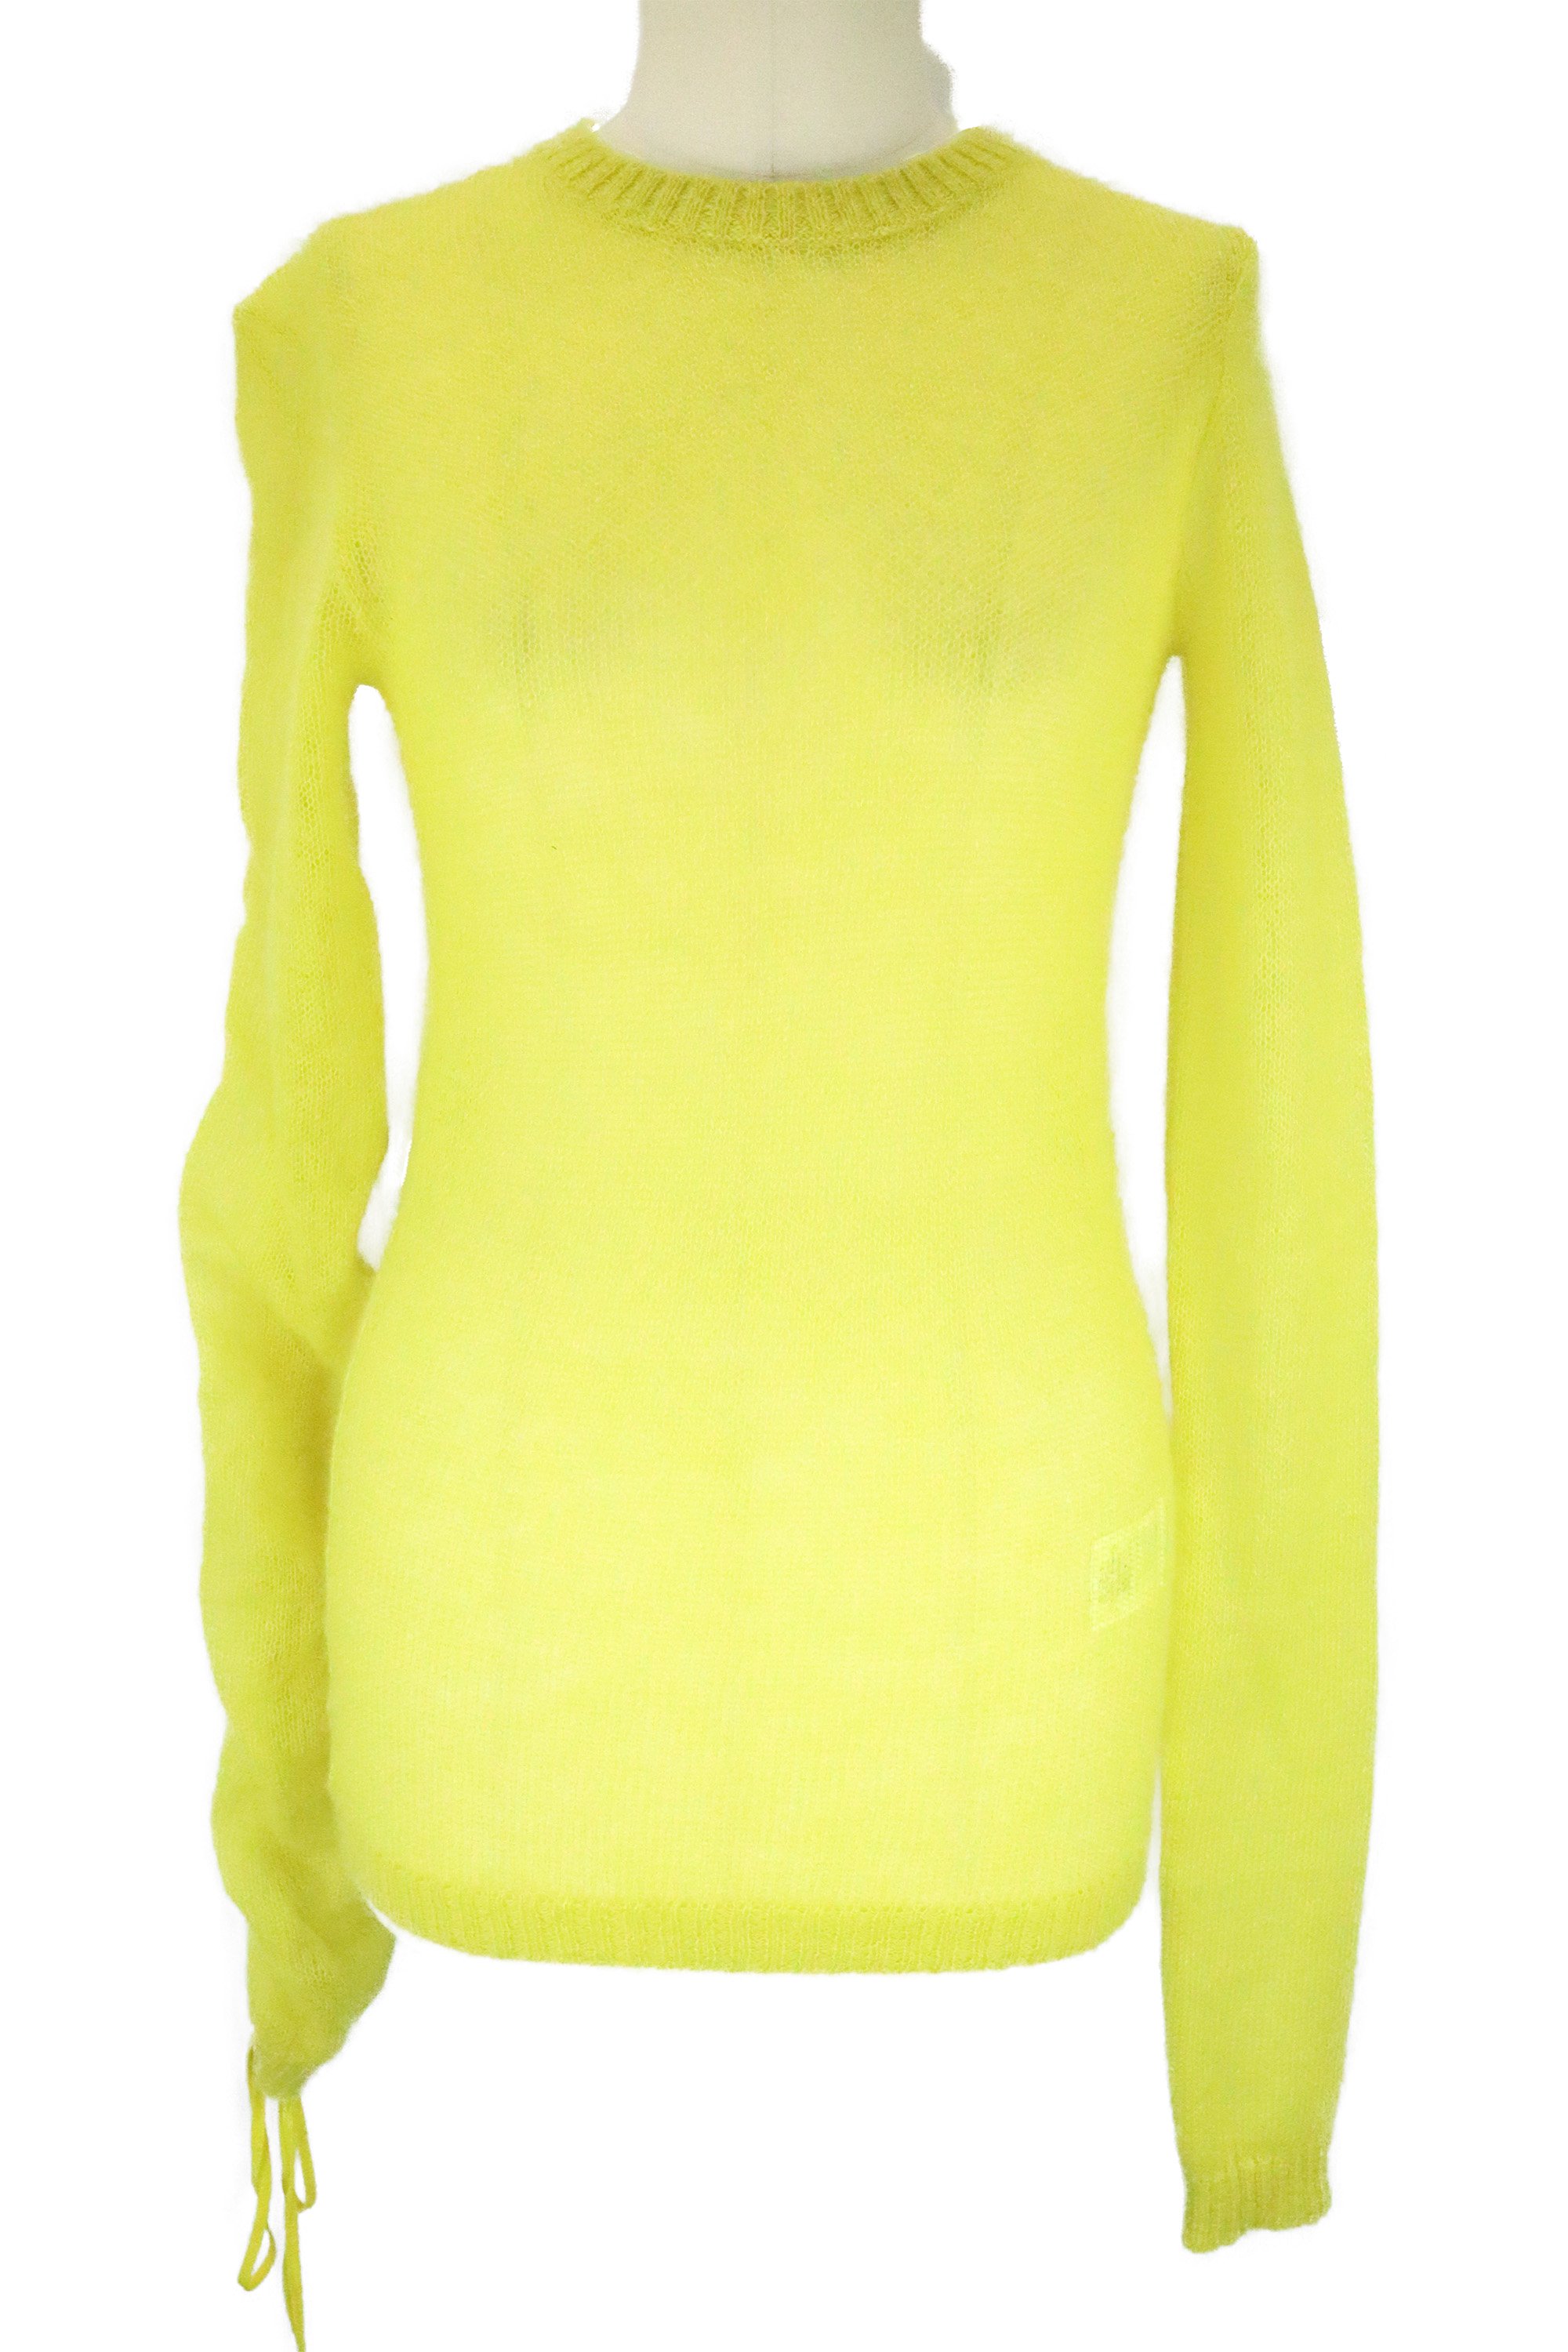 <img class='new_mark_img1' src='https://img.shop-pro.jp/img/new/icons6.gif' style='border:none;display:inline;margin:0px;padding:0px;width:auto;' />N°21 Mohair laceup knit (YELLOW)